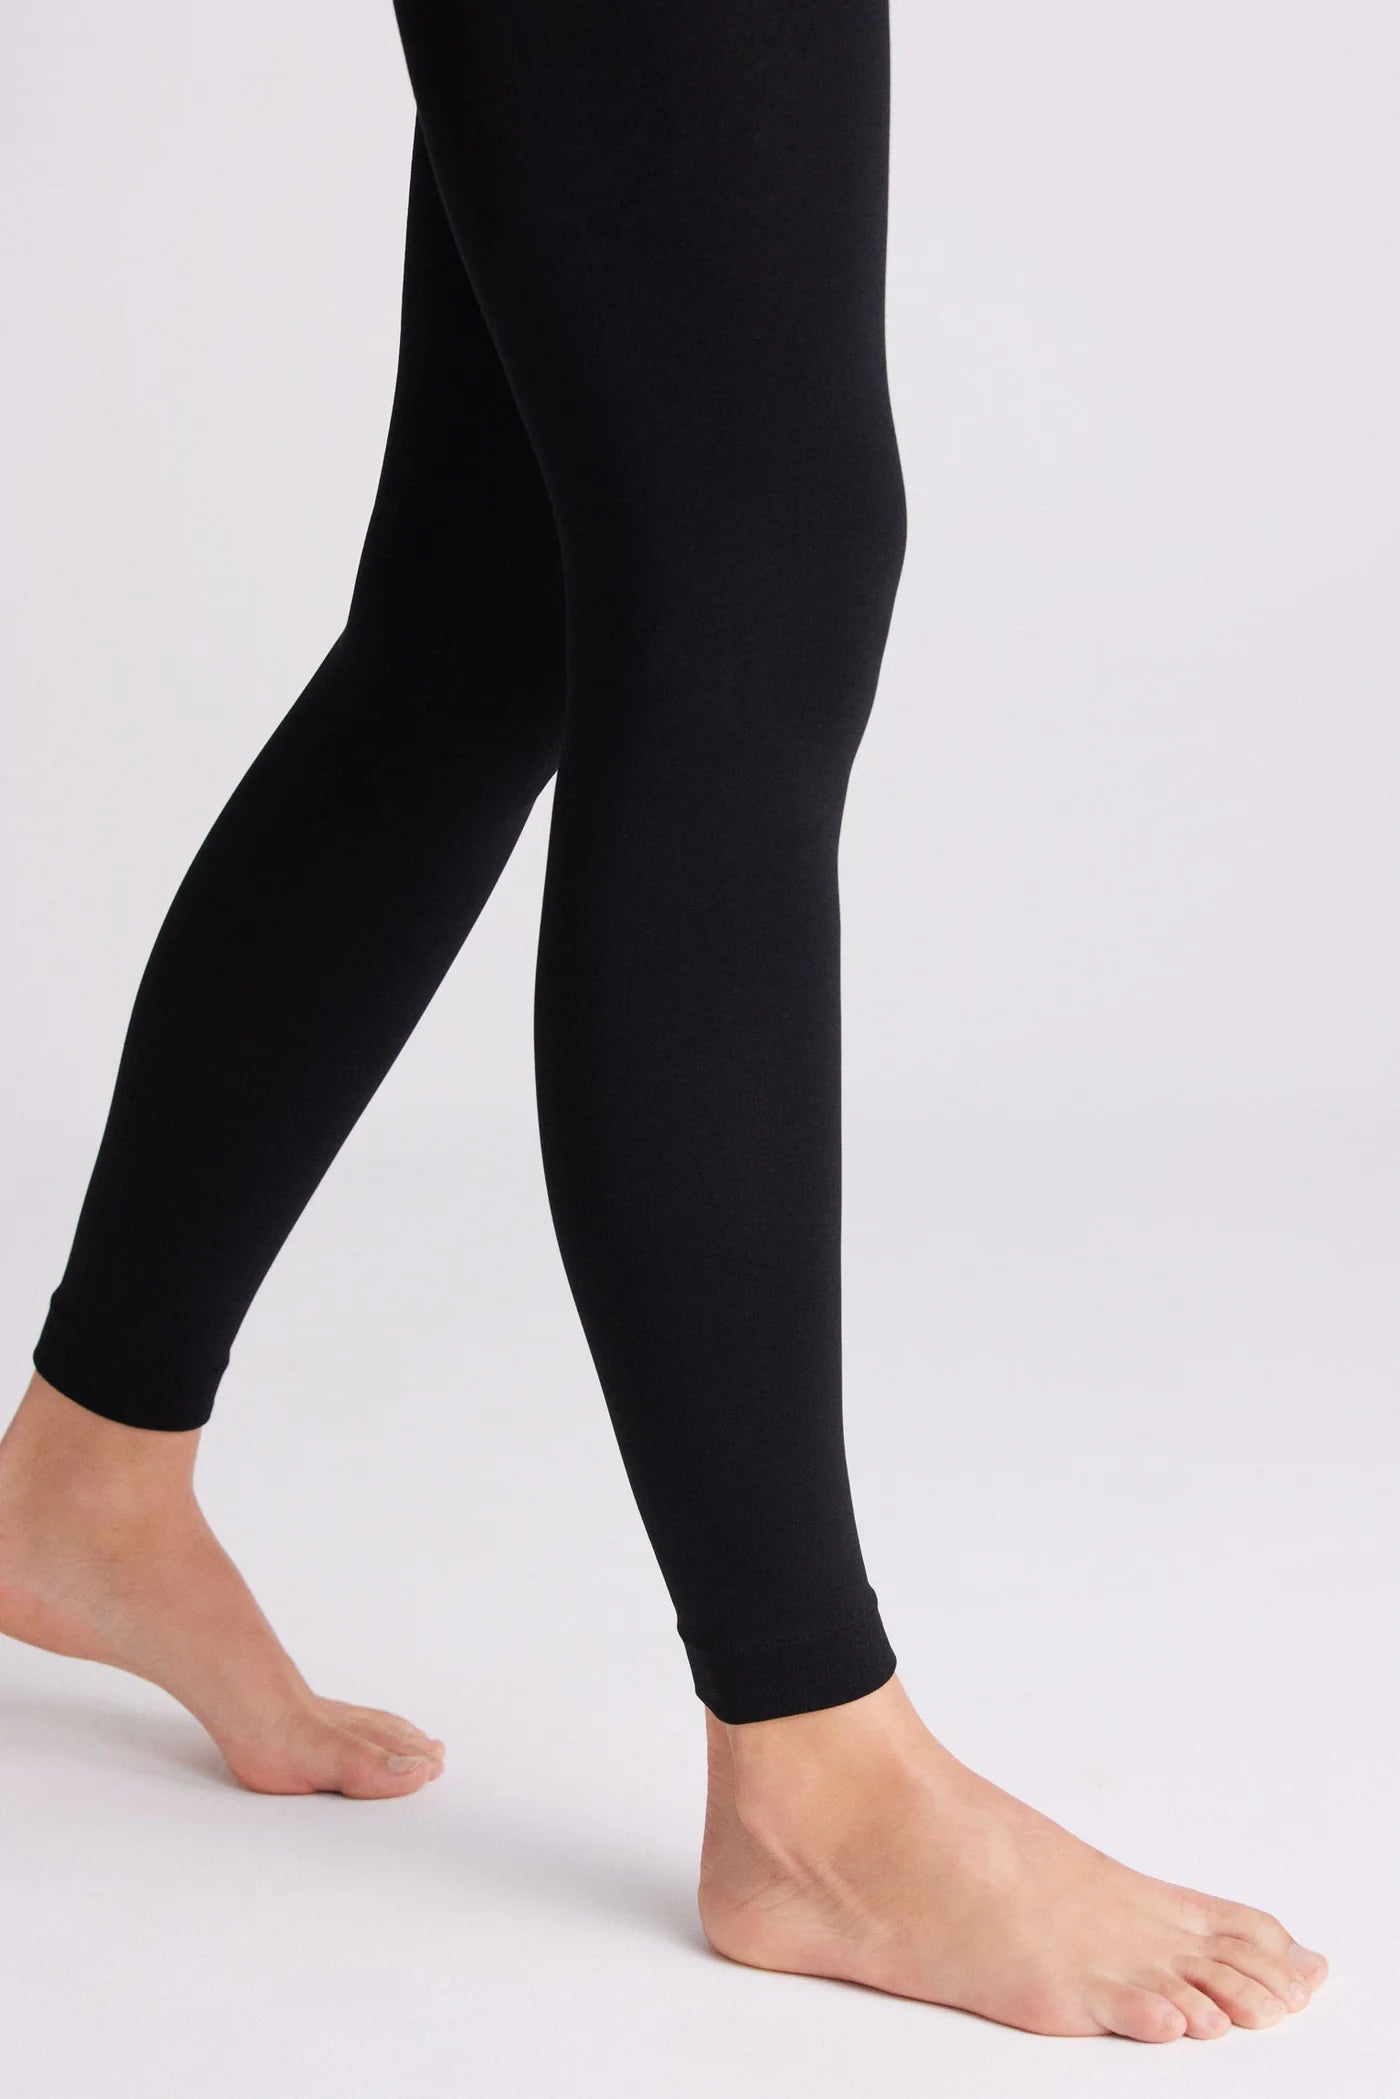 Ysabel Mora 13841 Thermal Fleece Lined Footless Tights in black detail cuff